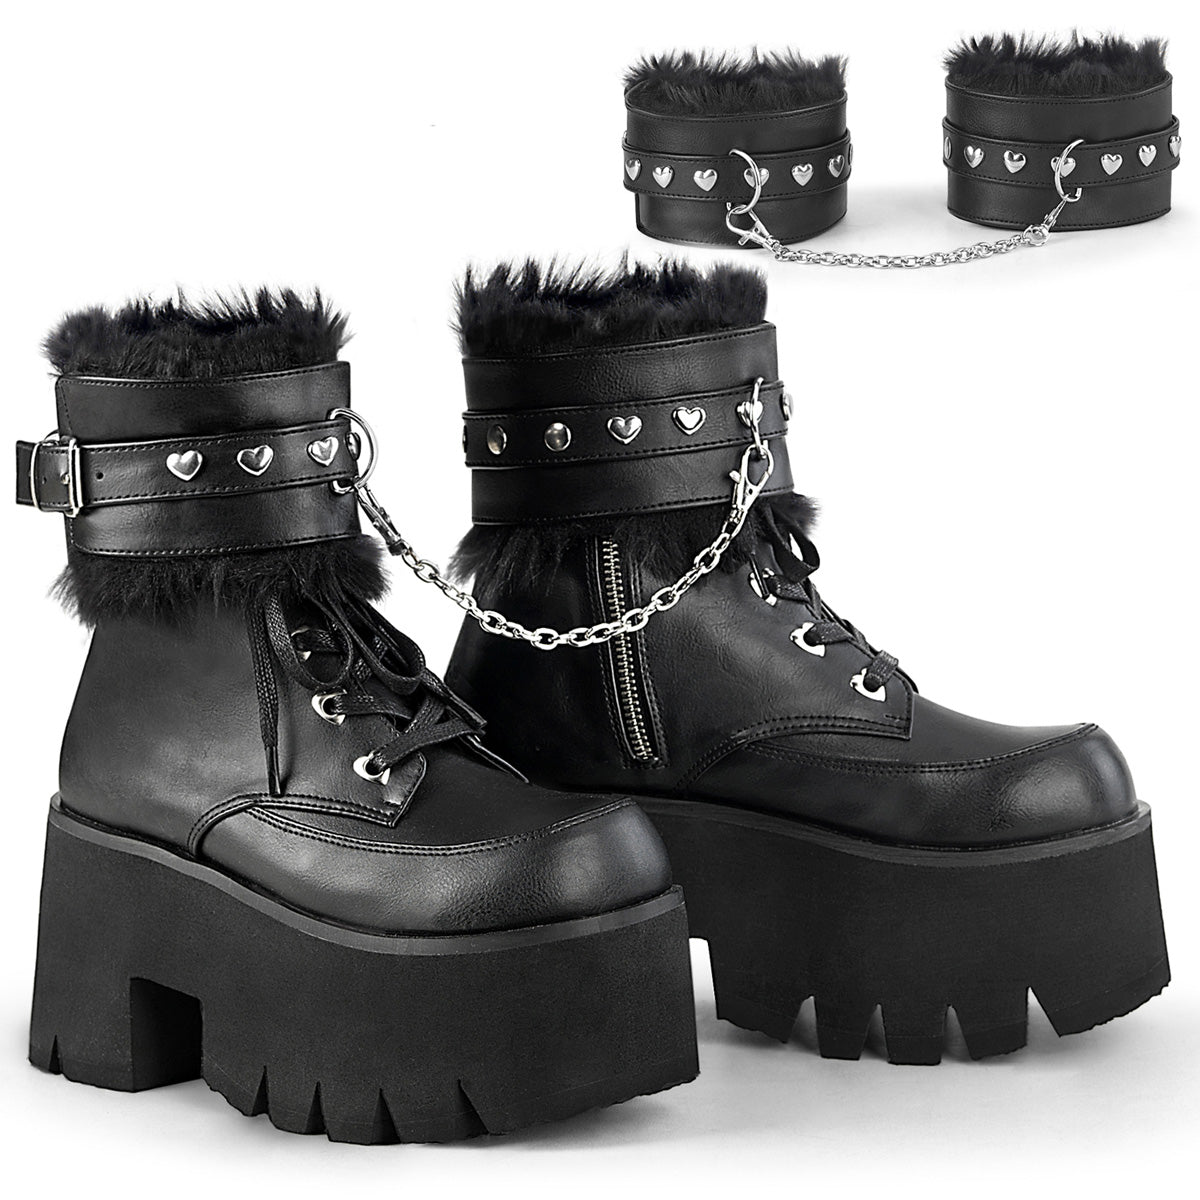 Demonia Ashes 57 Black - Model Express VancouverBoots